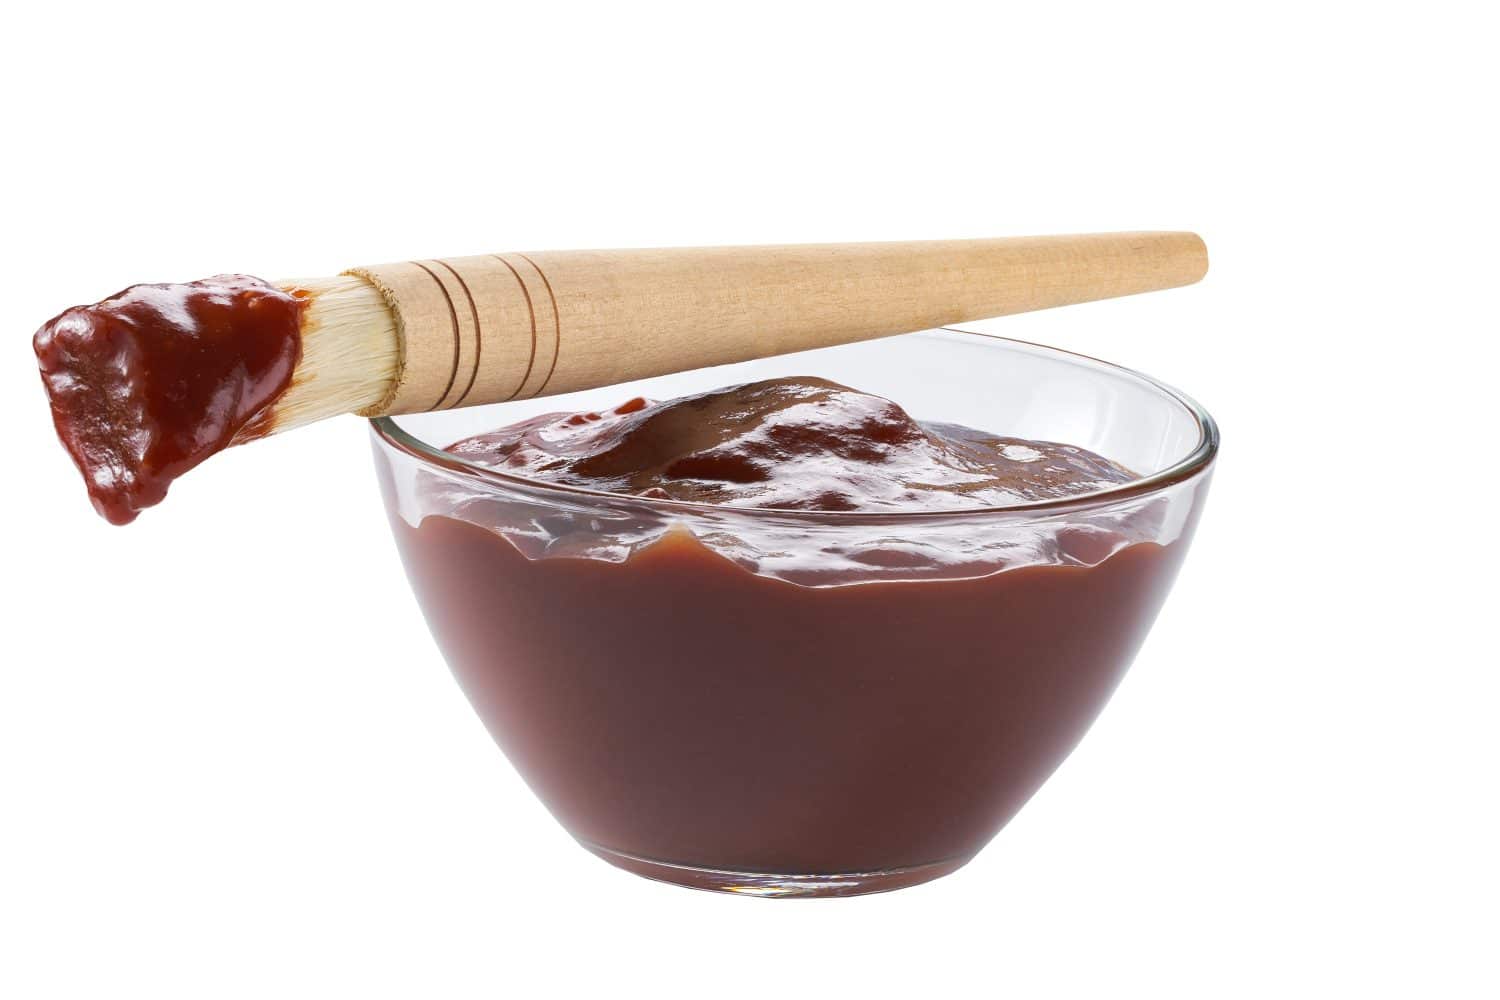 Barbecue sauce in a saucer with basting brush isolated on a white background. Glass dish of barbecue sauce with basting brush